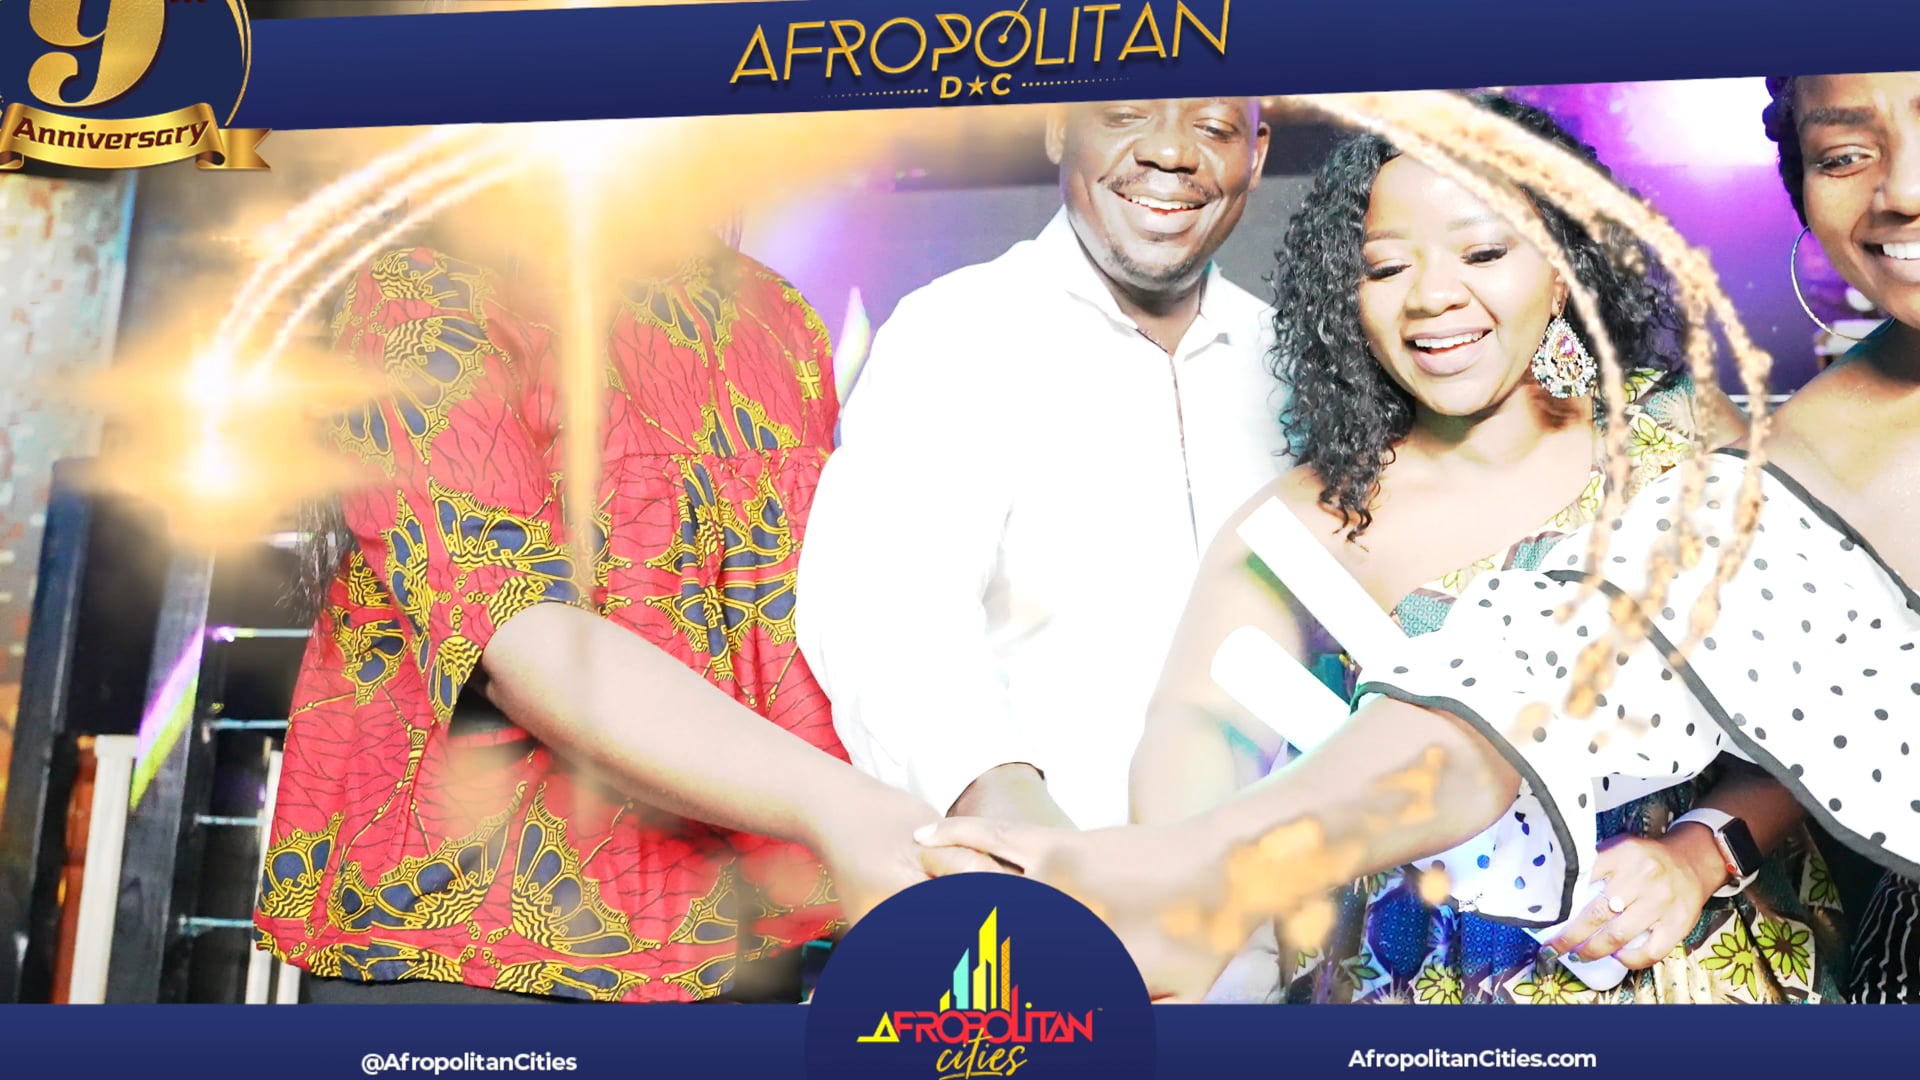 Recap Of The 9 Year Anniversary Celebration of AfropolitanDC